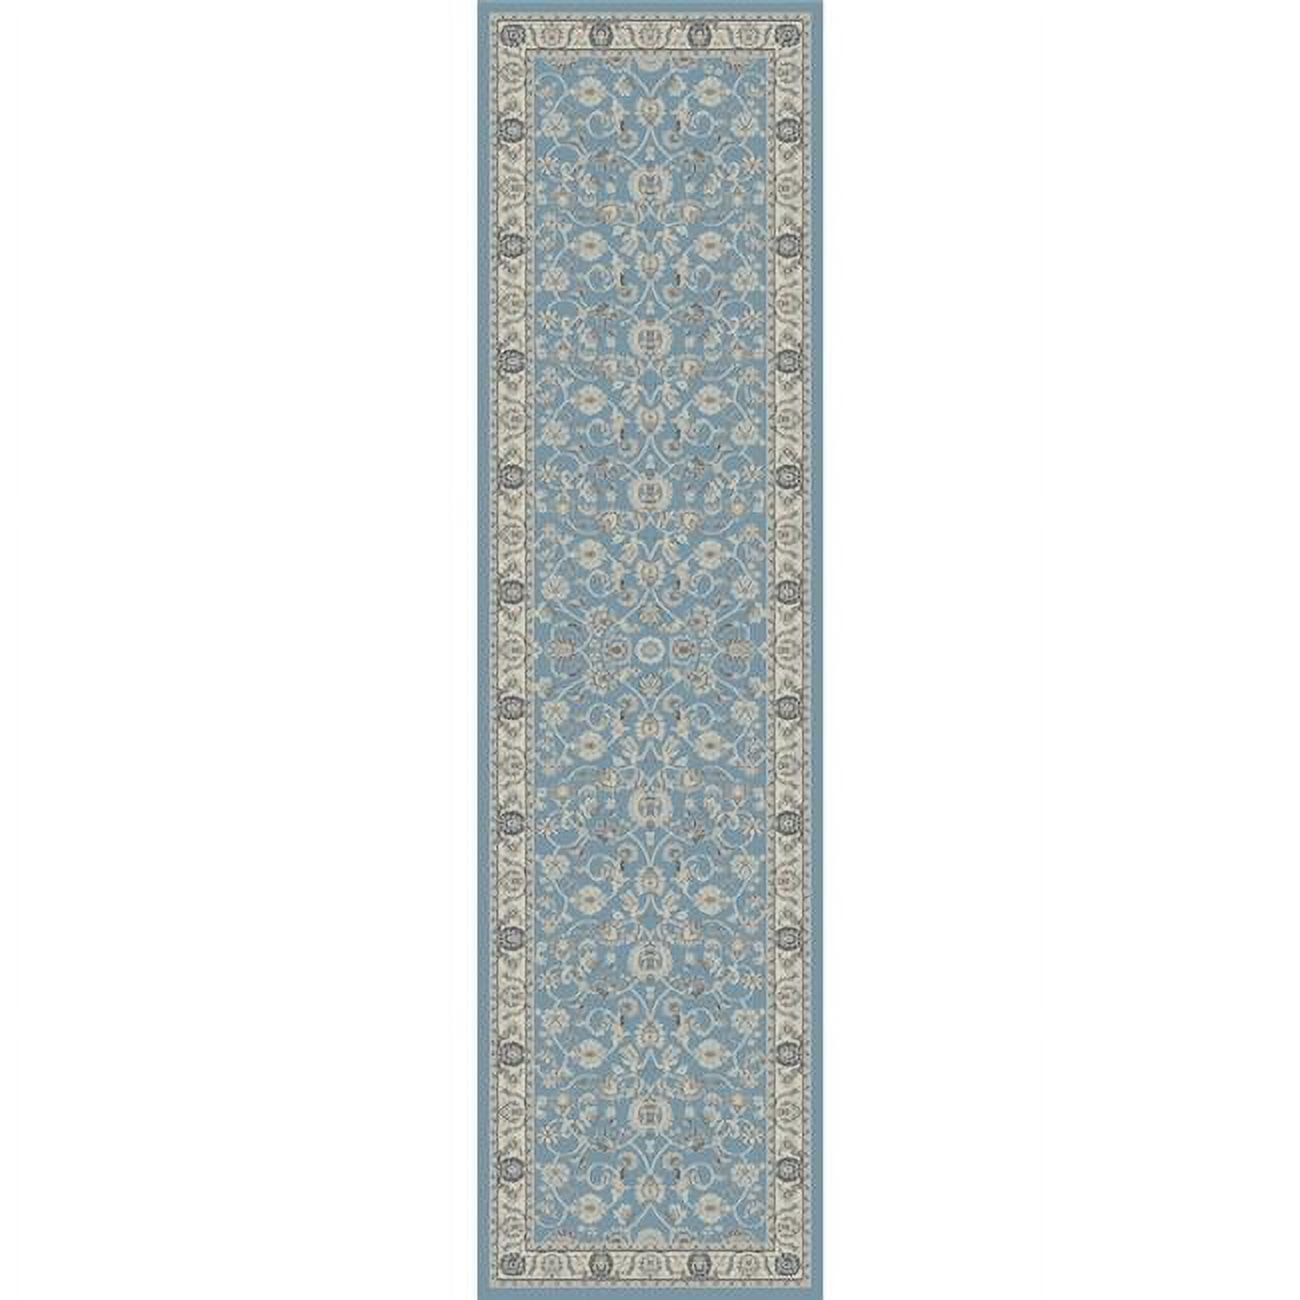 Picture of Concord Global 28142 2 ft. x 7 ft. 3 in. Kashan Bergama - Blue